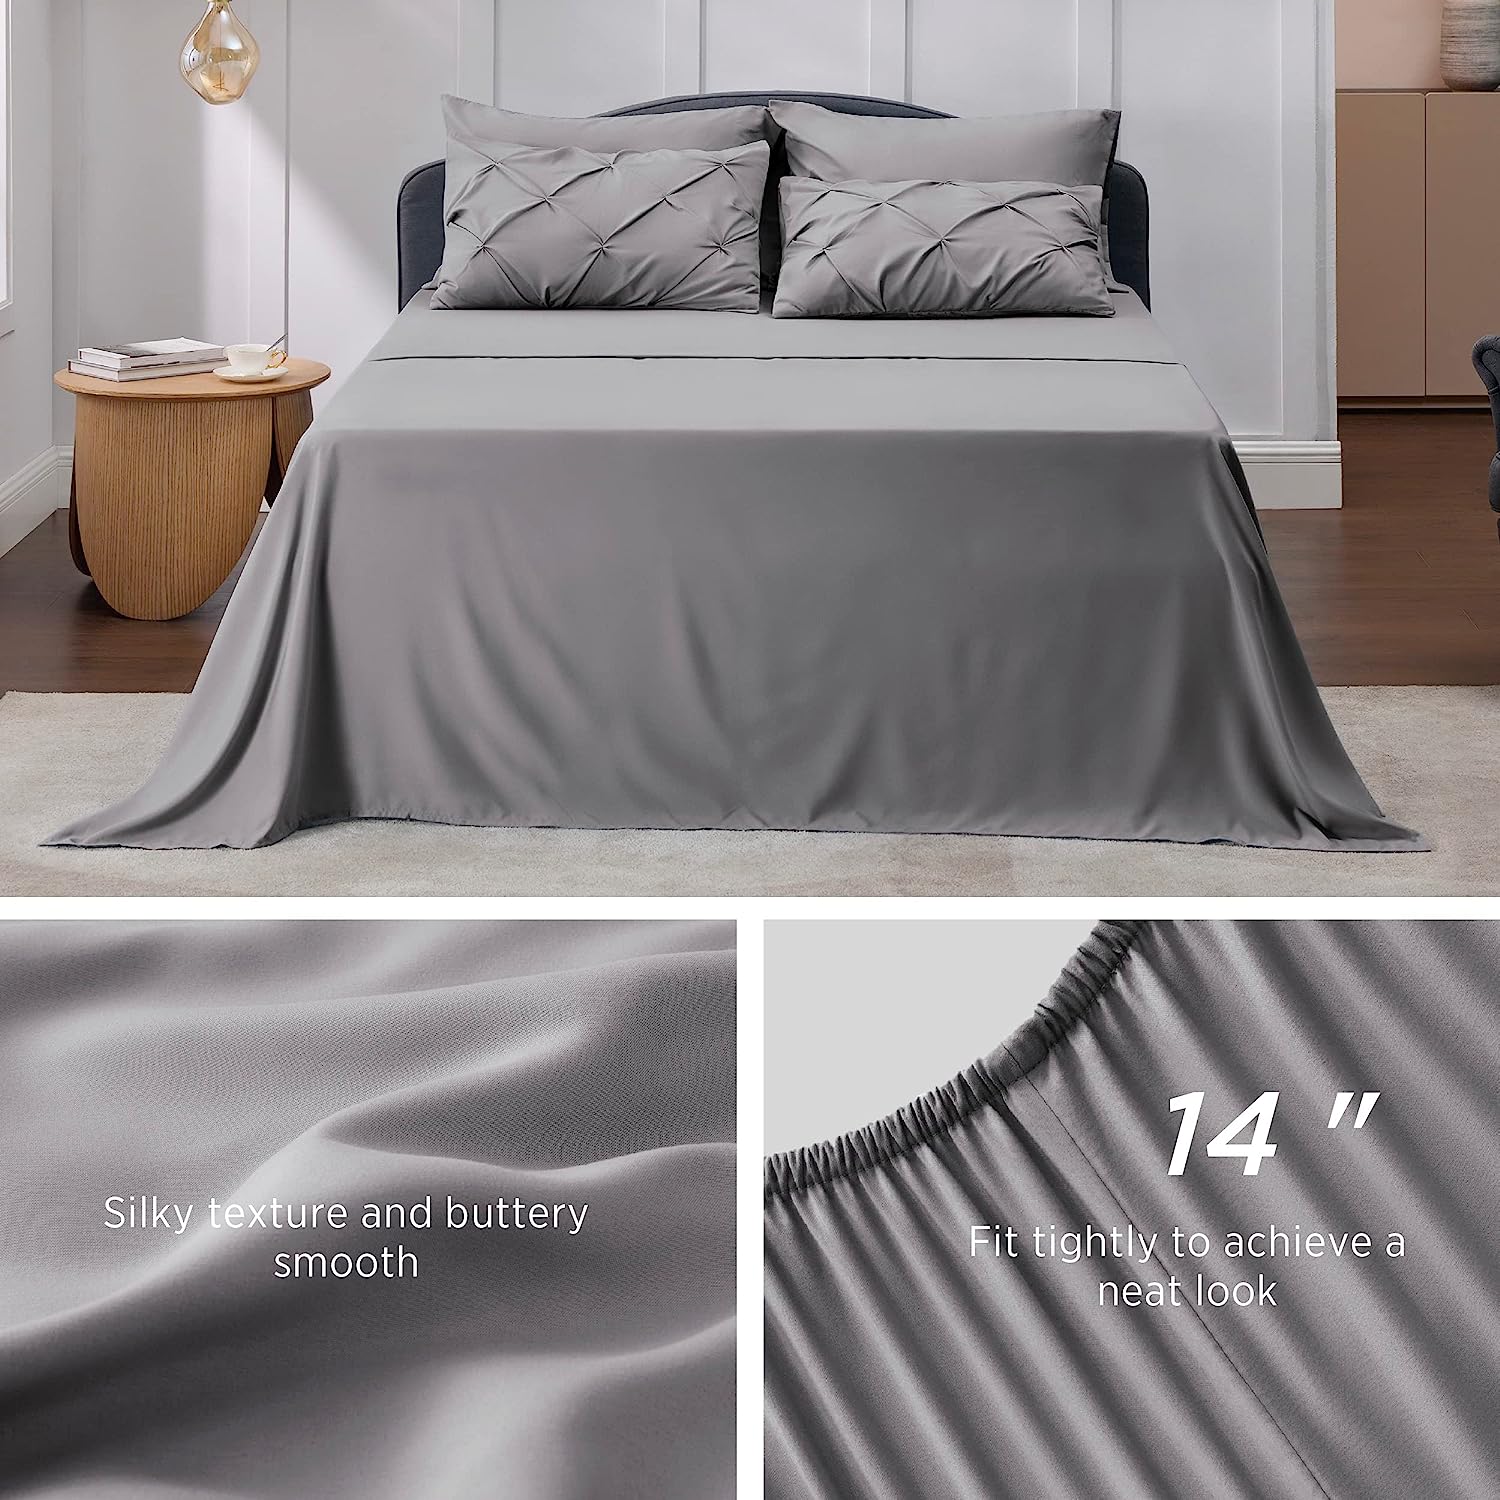 Bedsure Queen Sheets Set Grey - Soft Bed Sheets for Queen Size Bed